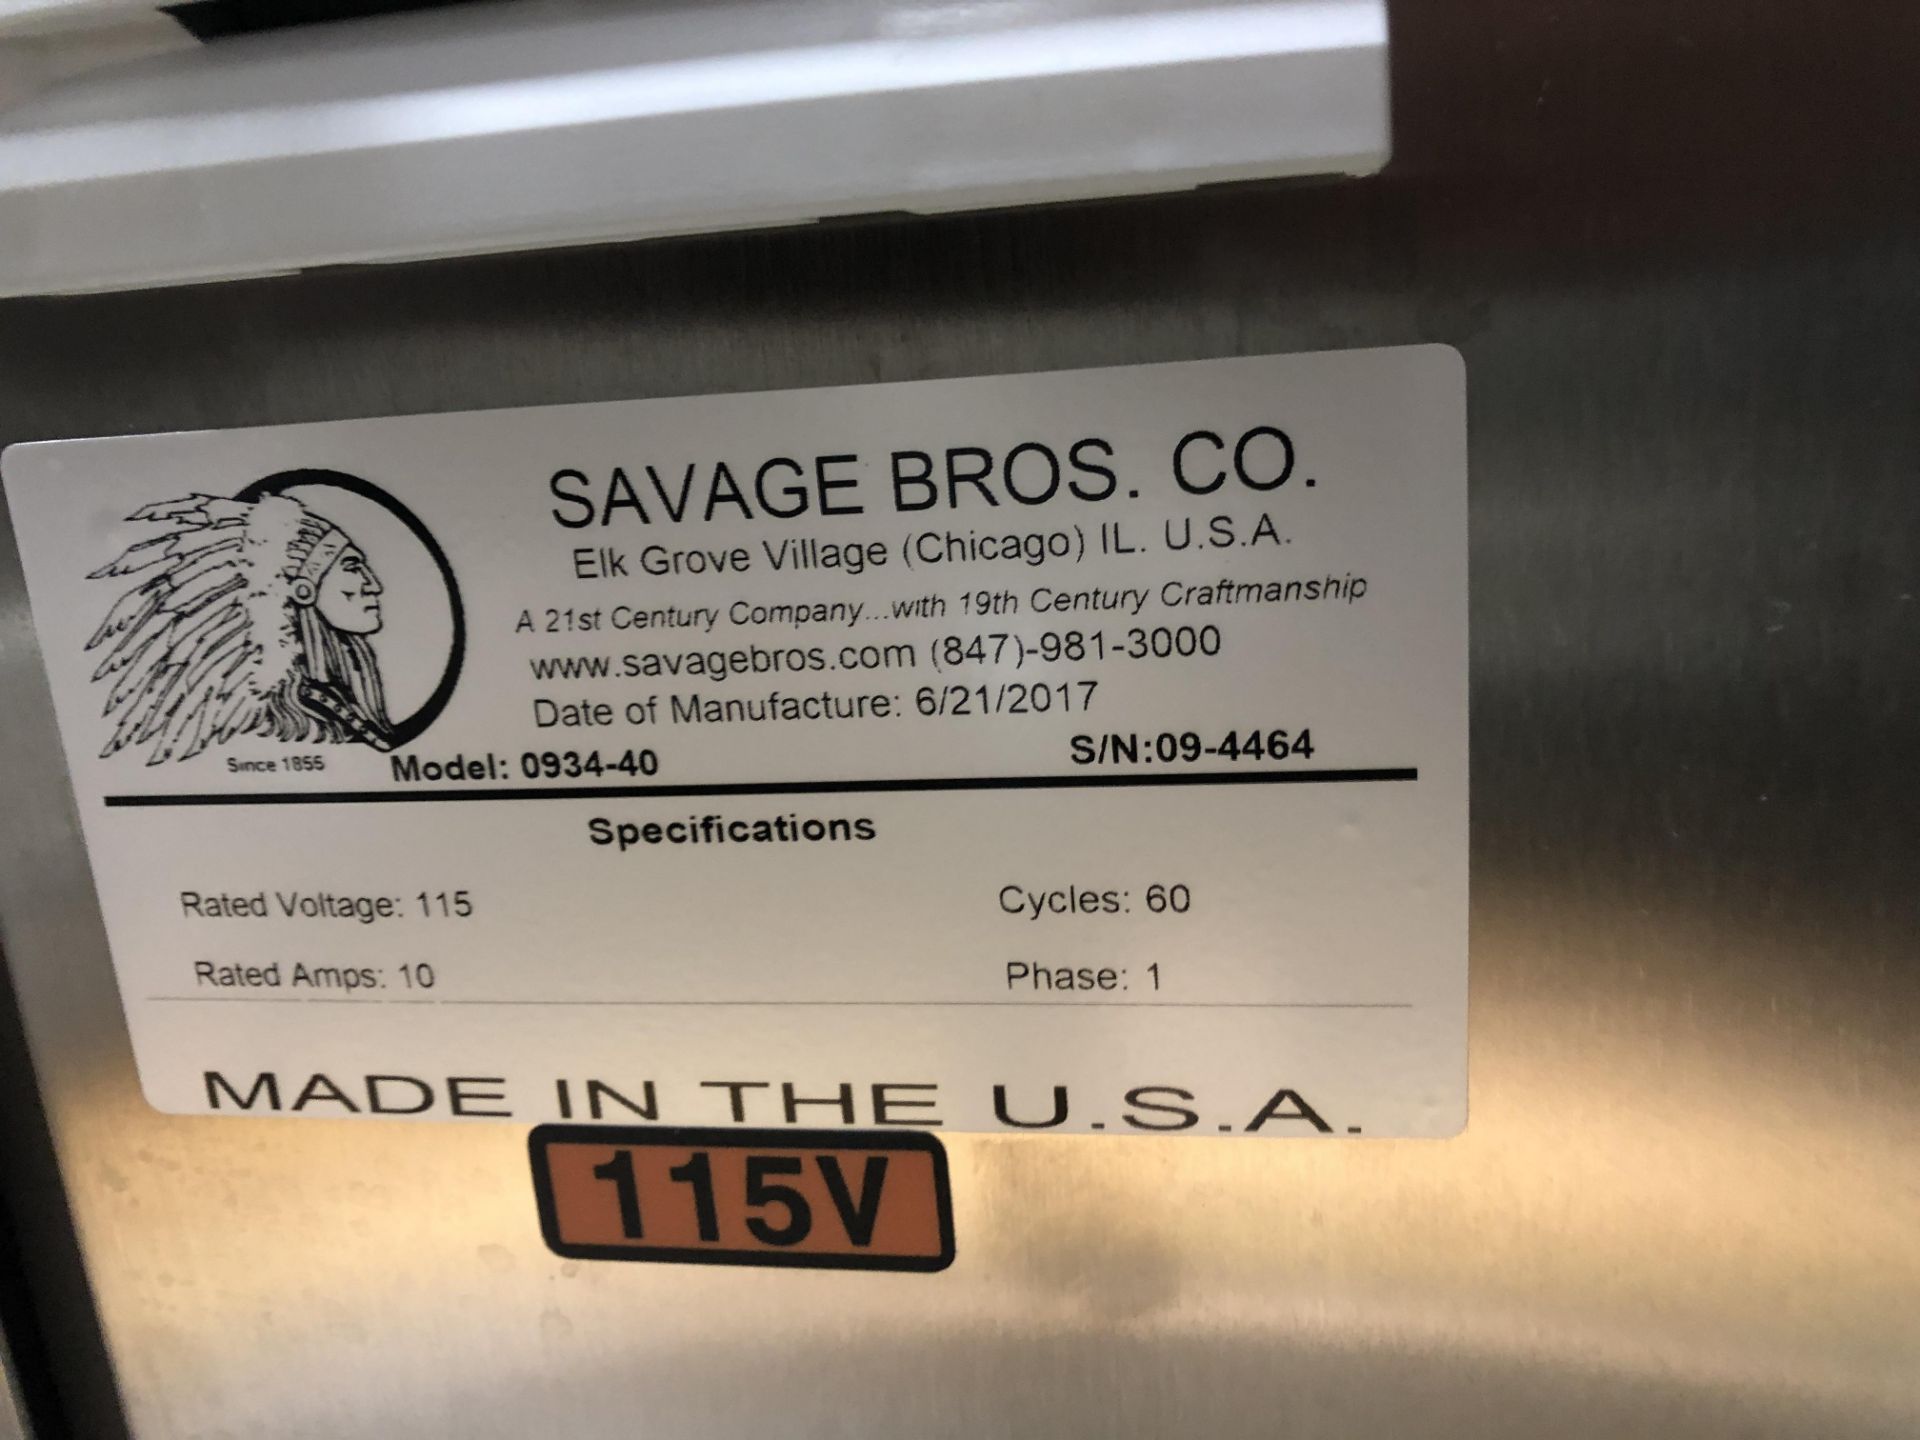 Savage 50-lb Stainless Steel Chocolate Melter, model 0934-40, jacketed and agitated, electrically - Image 4 of 4